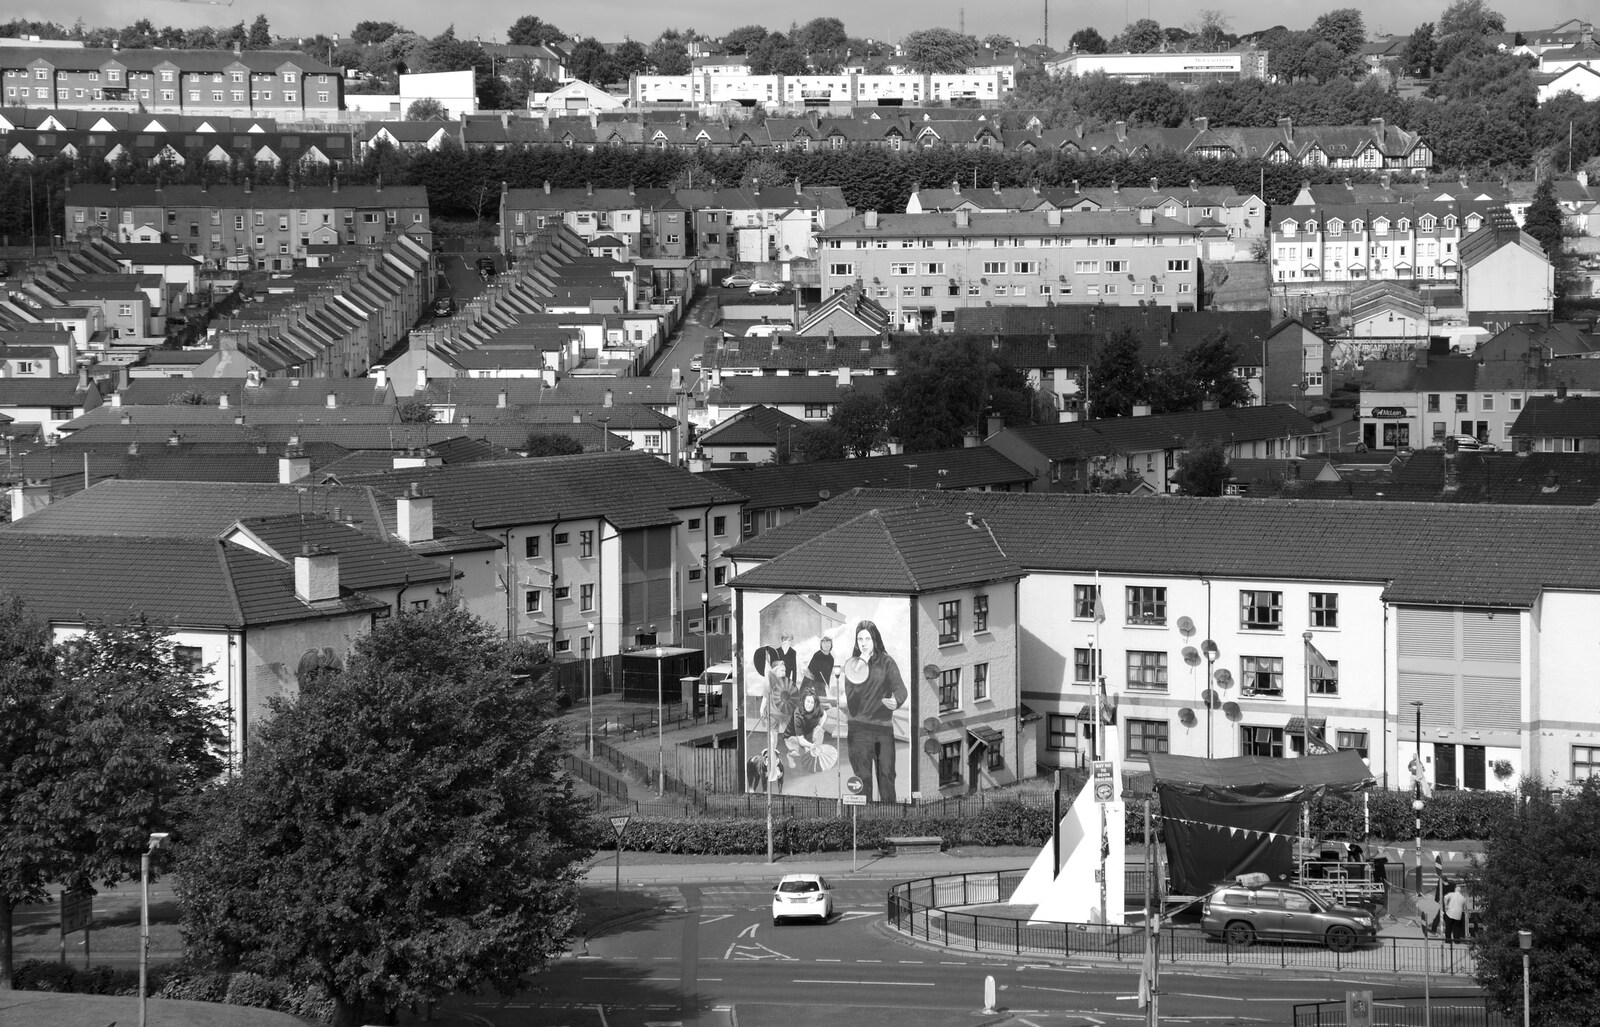 The Bogside from A Day in Derry, County Londonderry, Northern Ireland - 15th August 2019